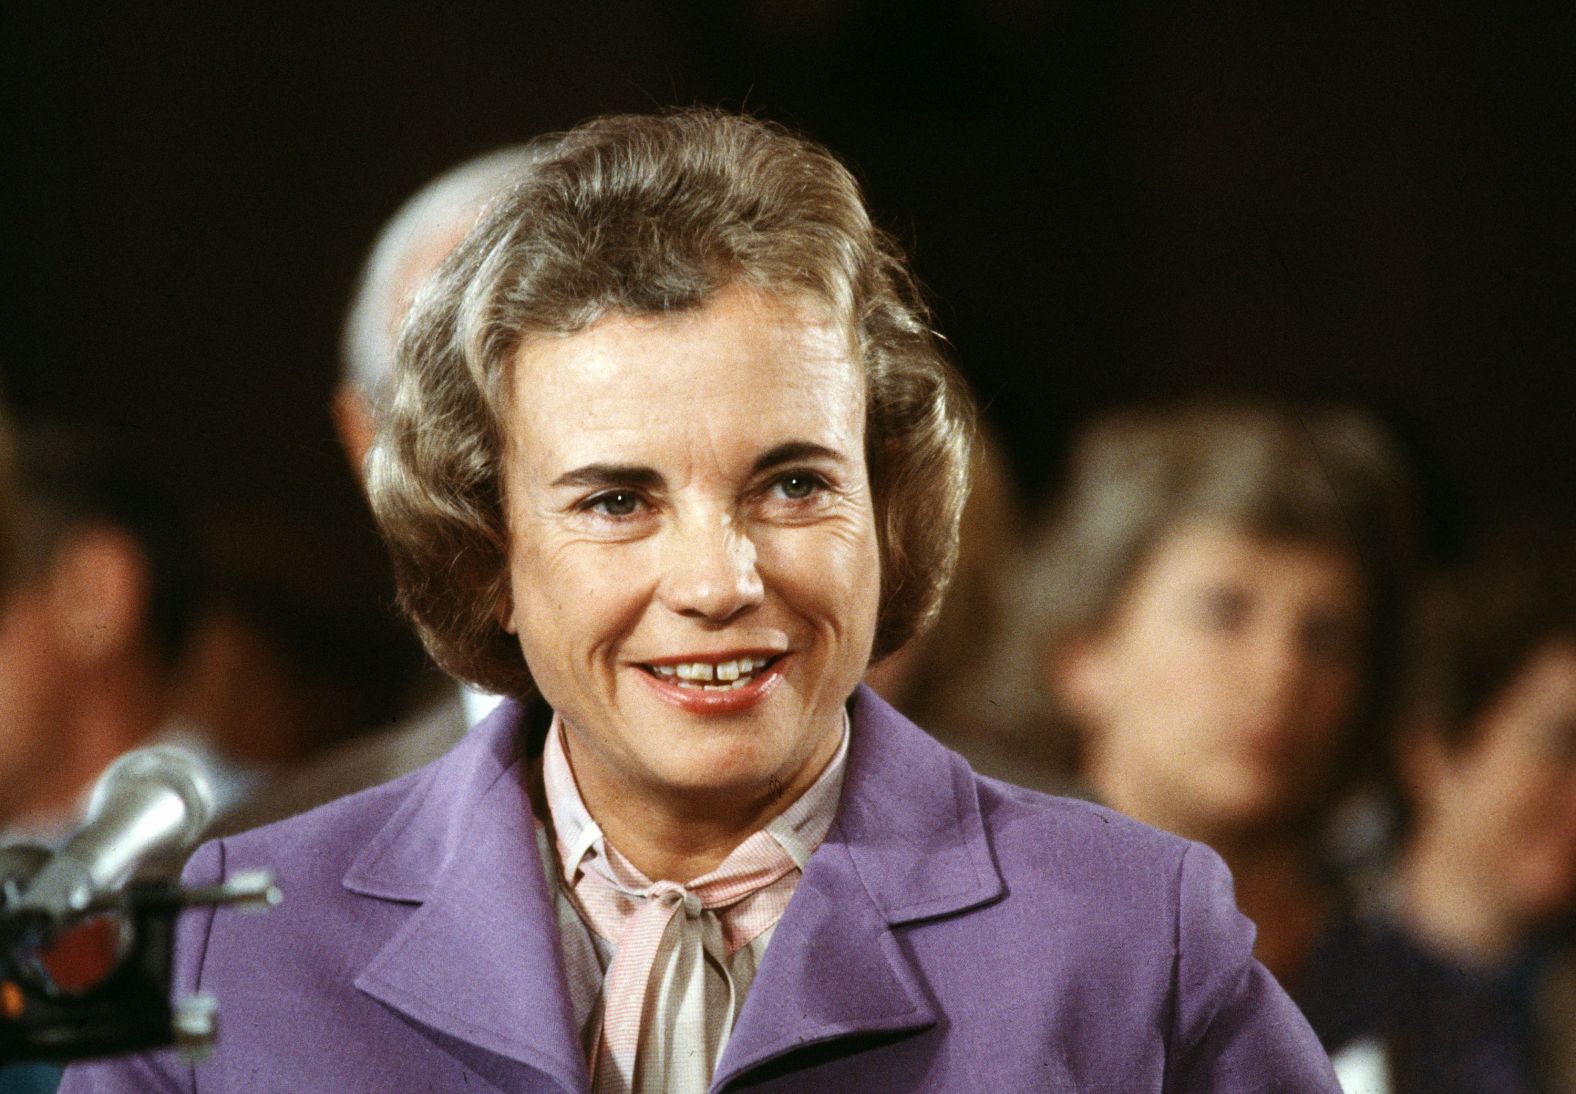 <a href="https://www.cnn.com/2023/12/01/politics/gallery/sandra-day-oconnor/index.html" target="_blank">Sandra Day O'Connor, </a>who blazed trails as the first woman to sit on the Supreme Court, died at the age of 93, the court announced on December 1.